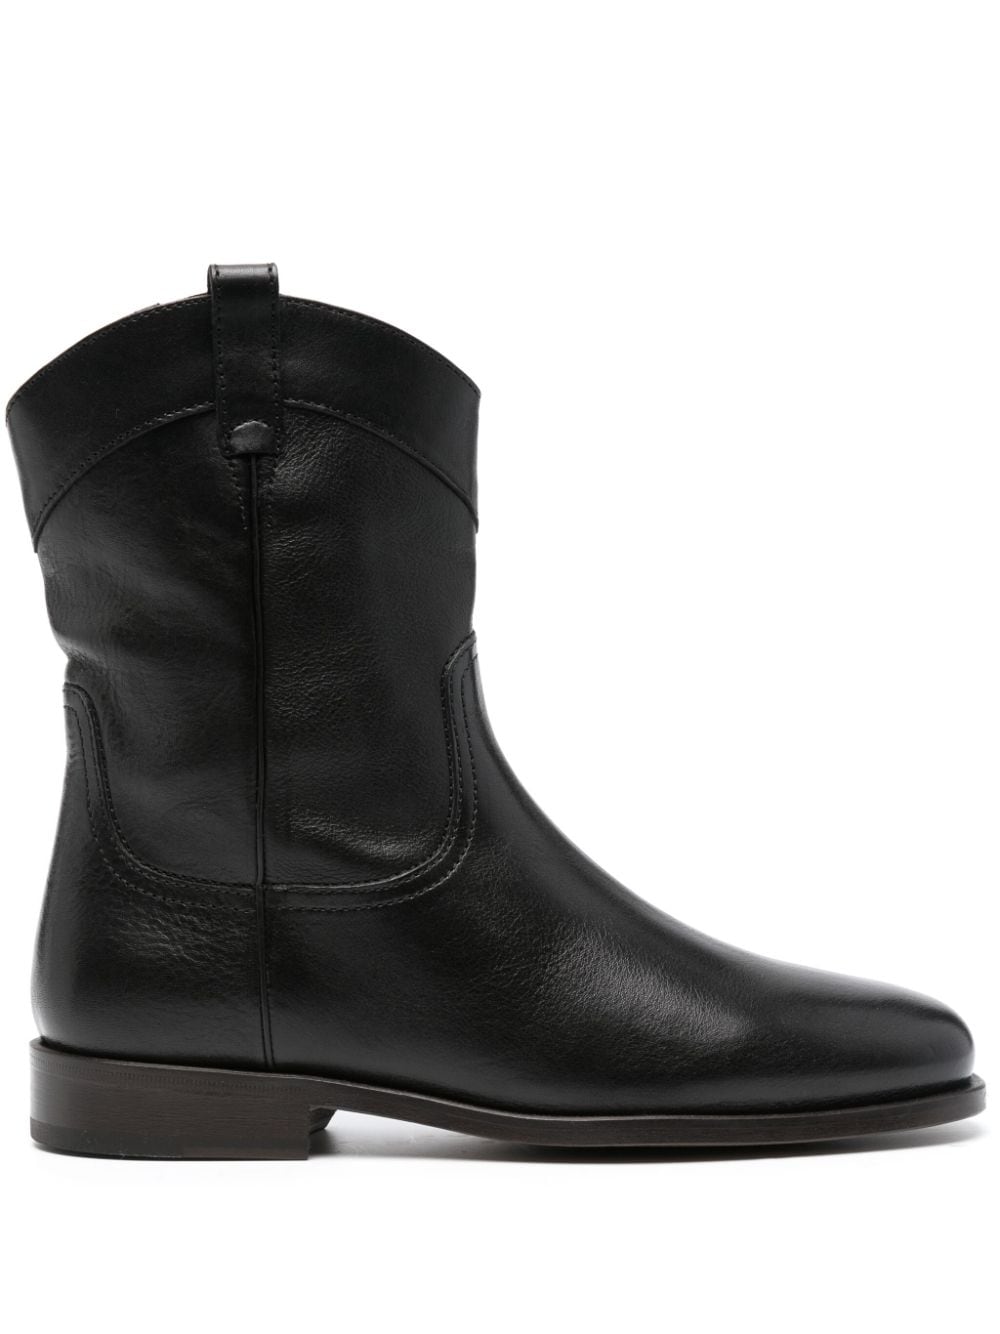 LEMAIRE WESTERN-STYLE LEATHER BOOTS